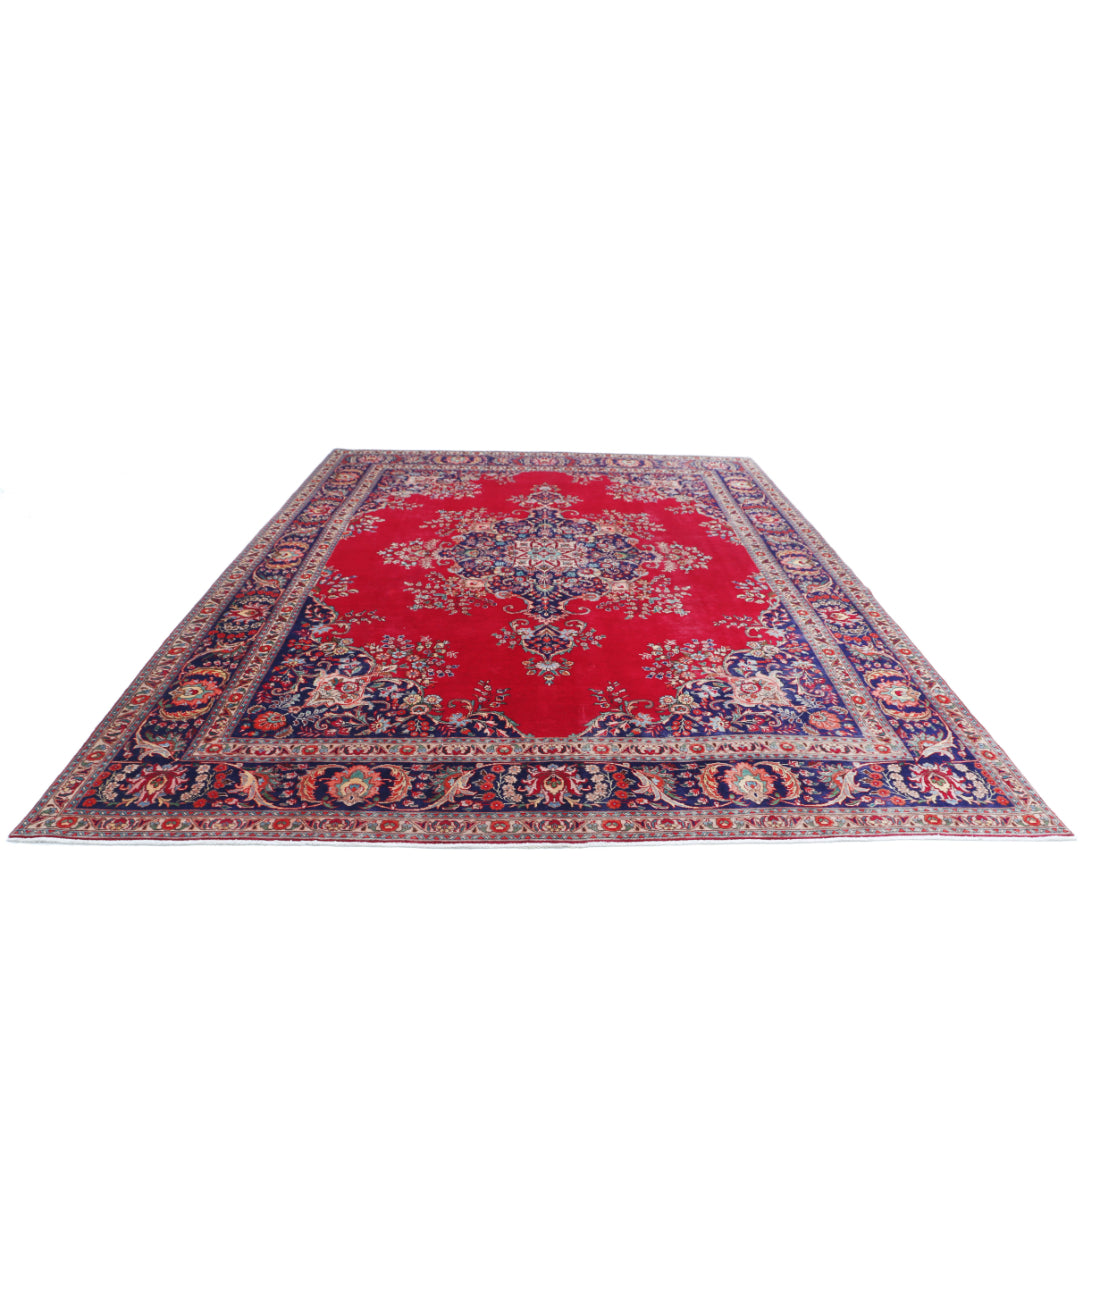 Hand Knotted Persian Tabriz Wool Rug - 9'11'' x 13'3'' 9'11'' x 13'3'' (298 X 398) / Red / Blue